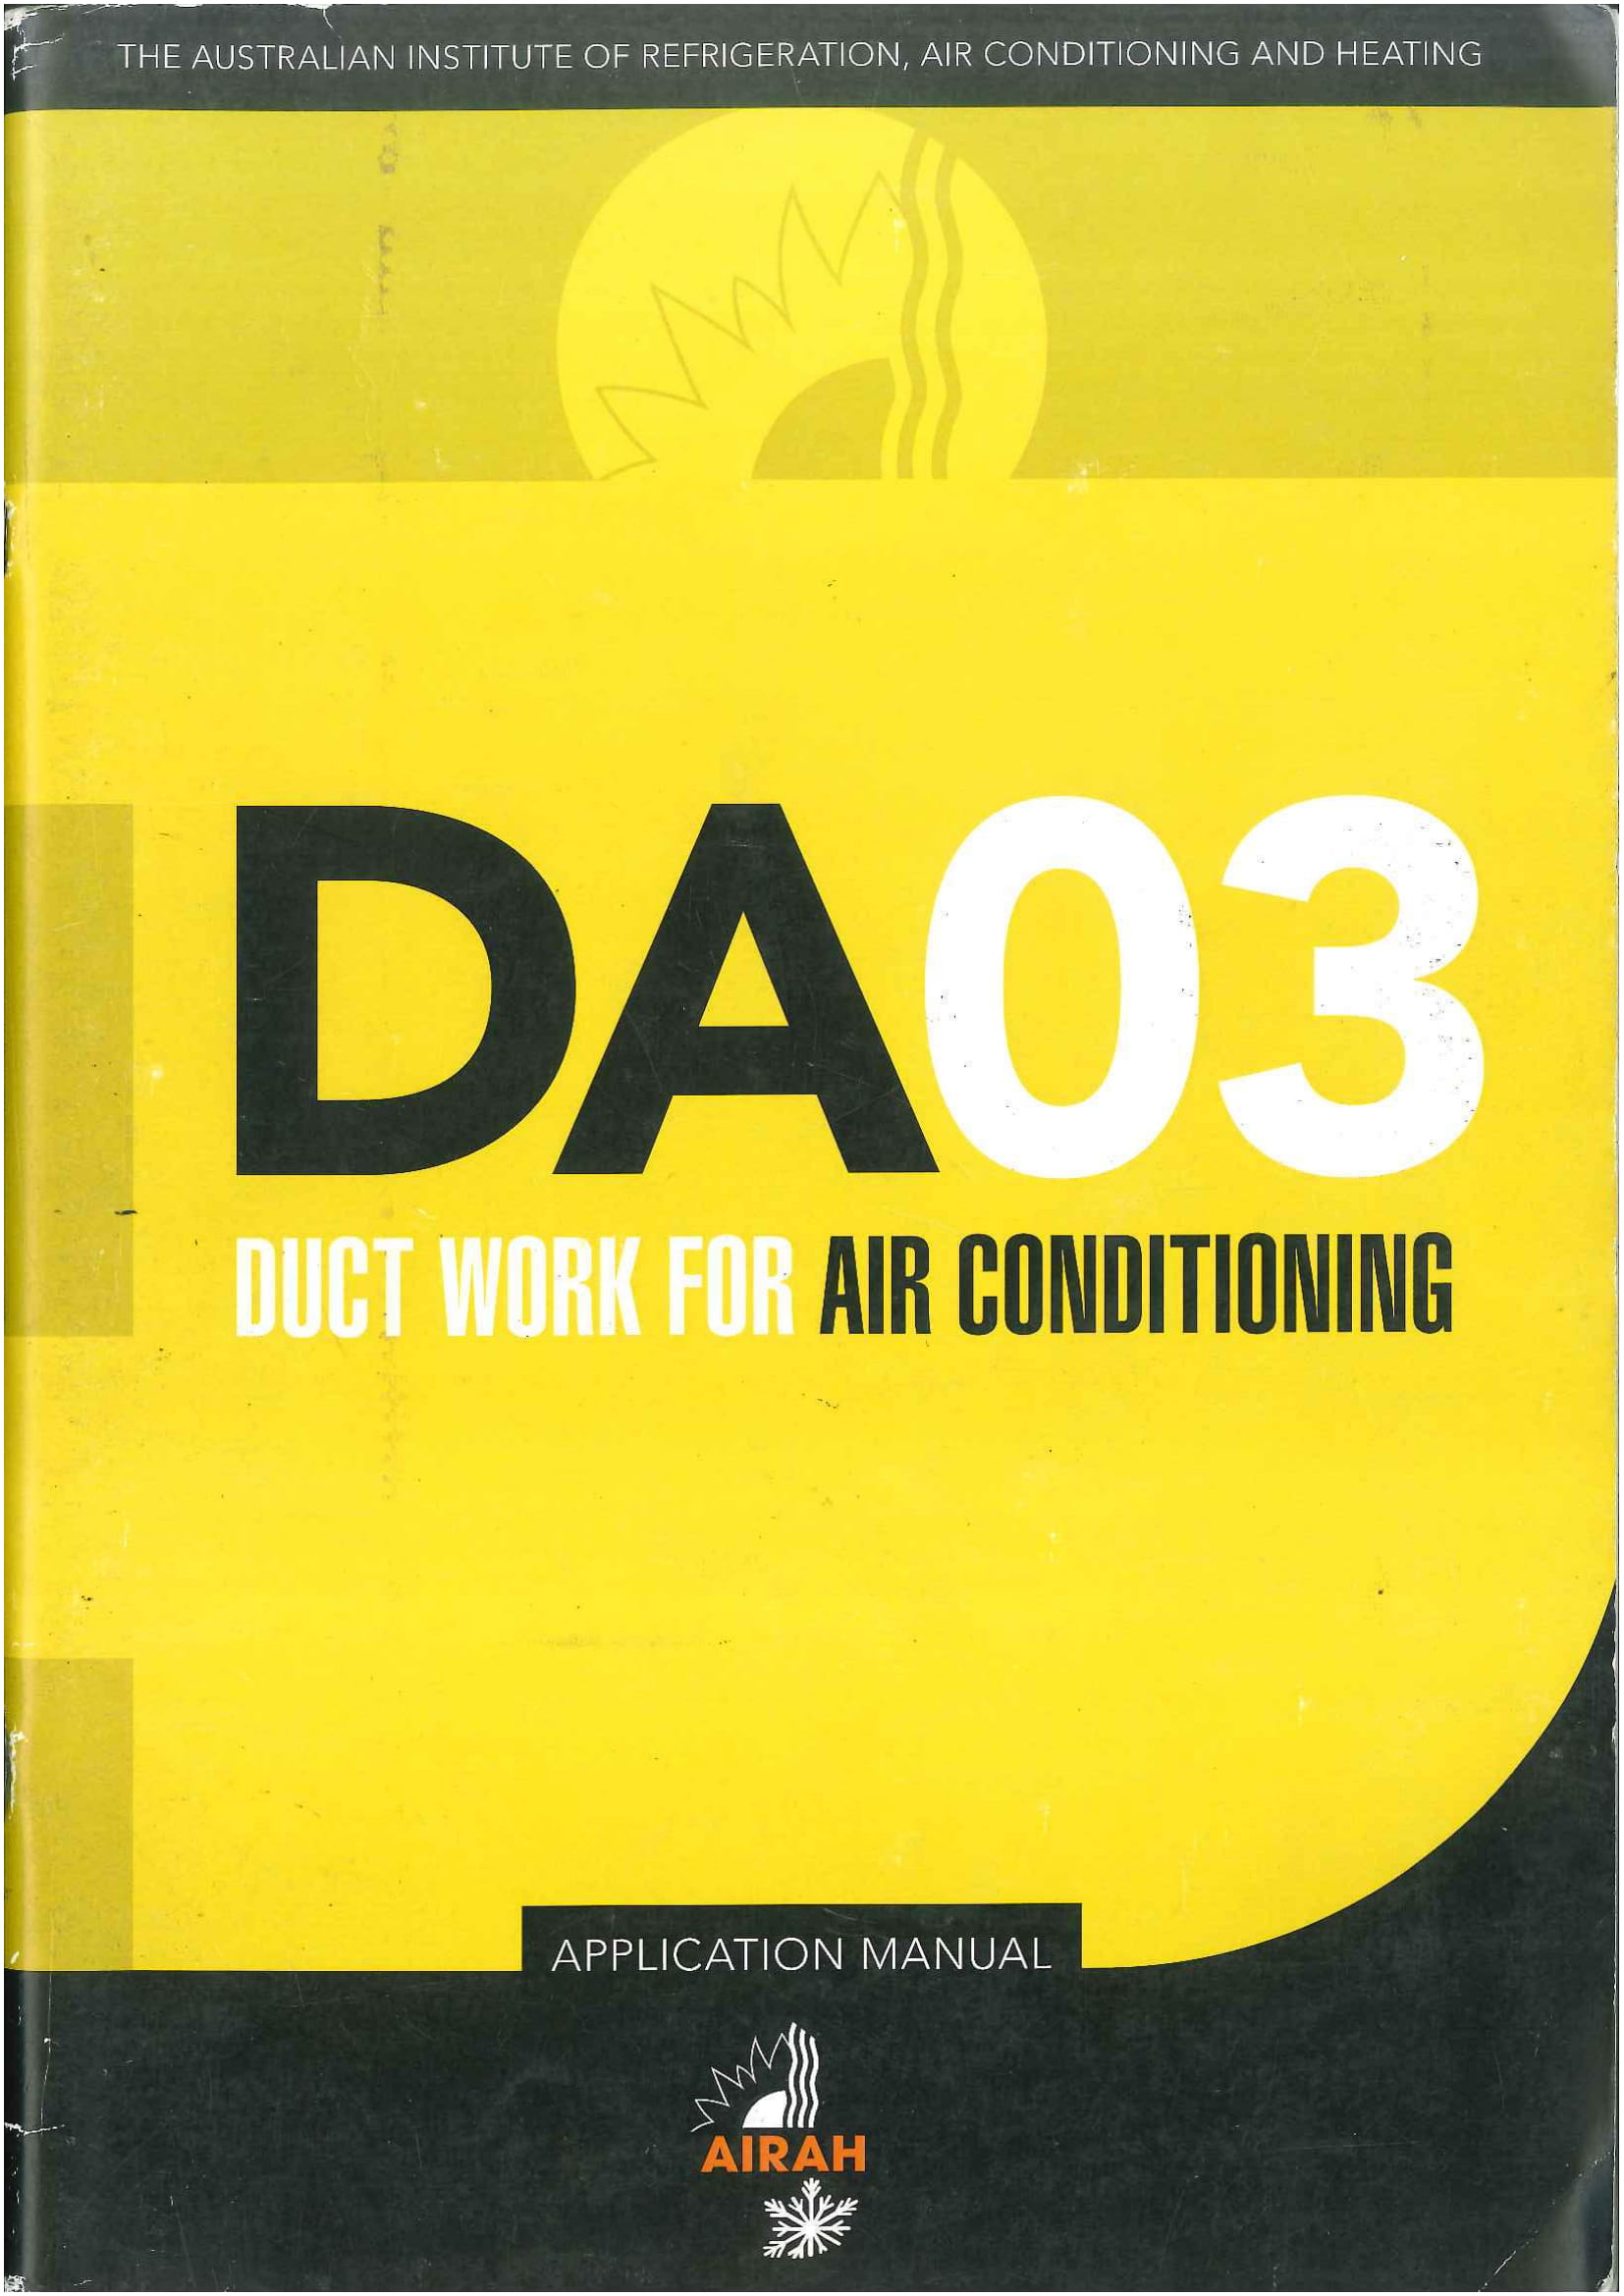 DA03 Duct work for Air conditioning